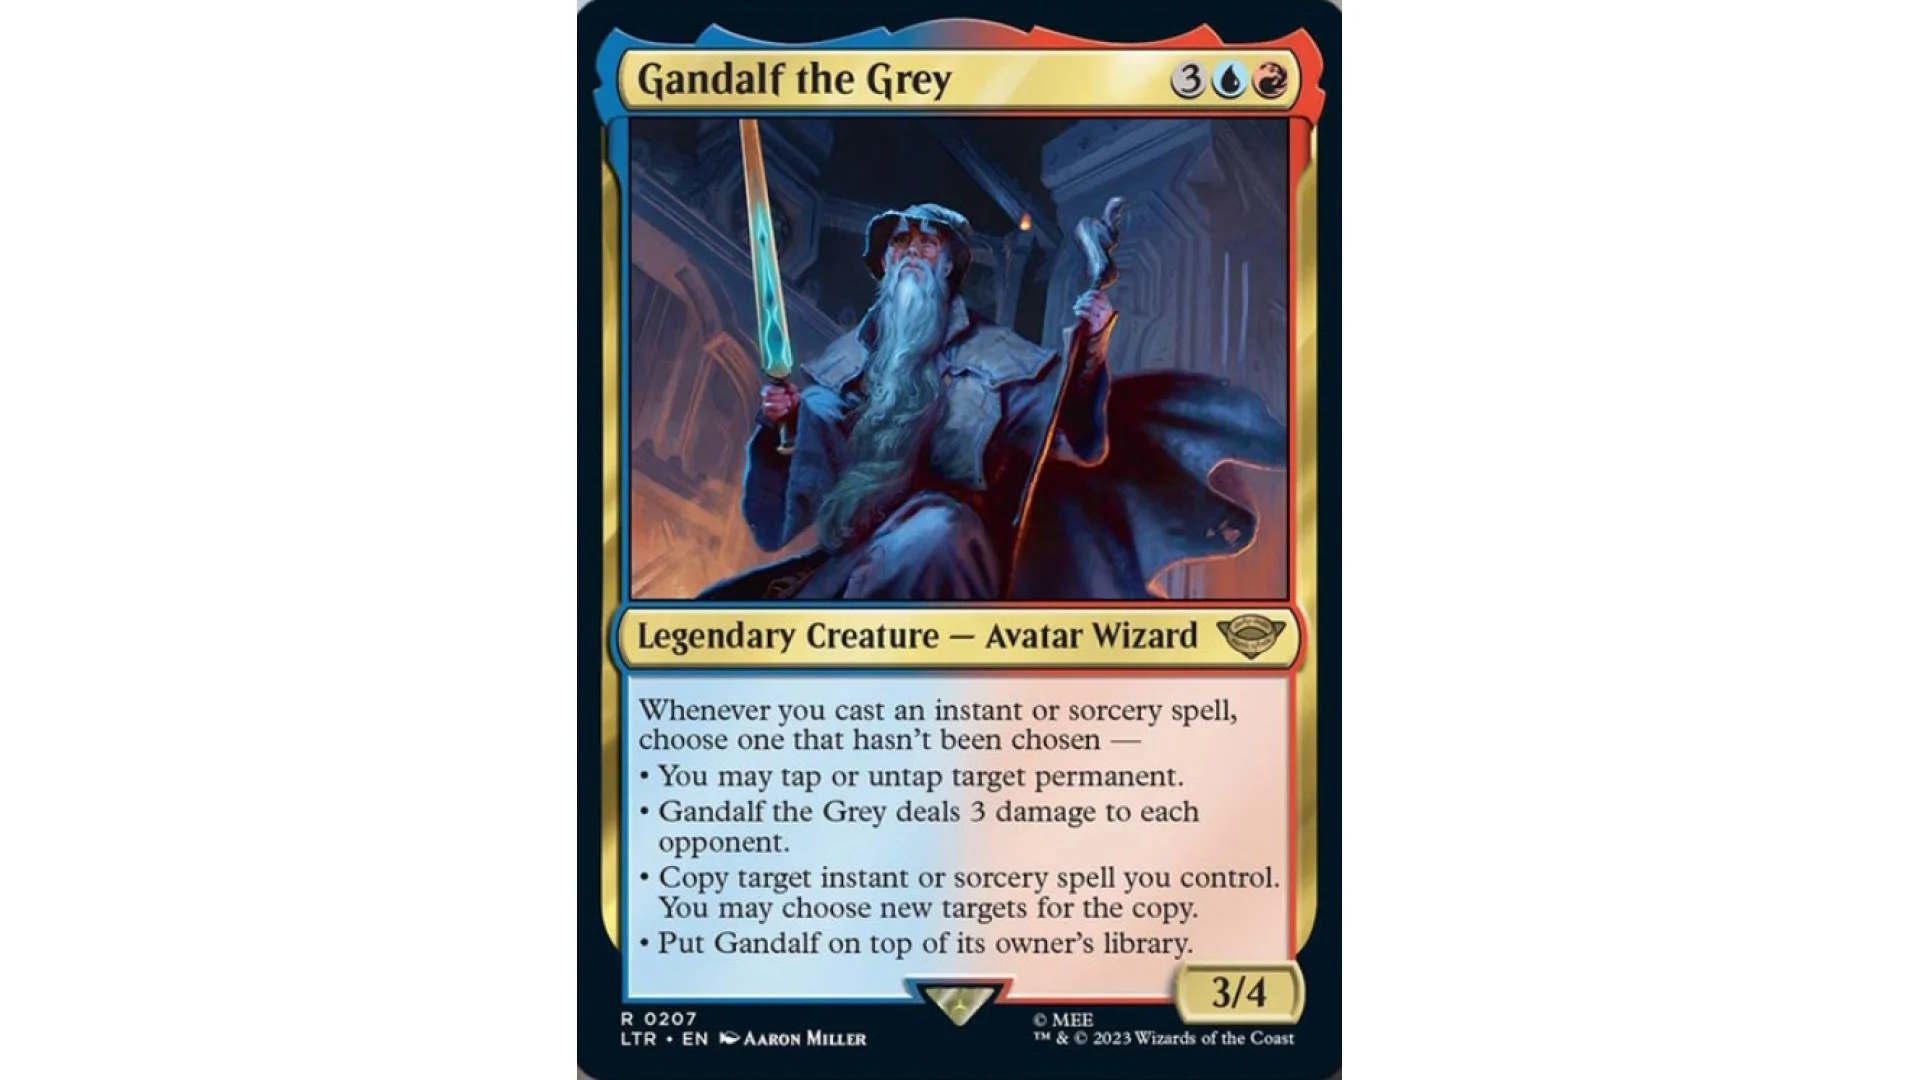 mtg-magic-the-gathering-cards-spoilers-lord-of-the-rings-lotr-gandalf-the-grey.jpg